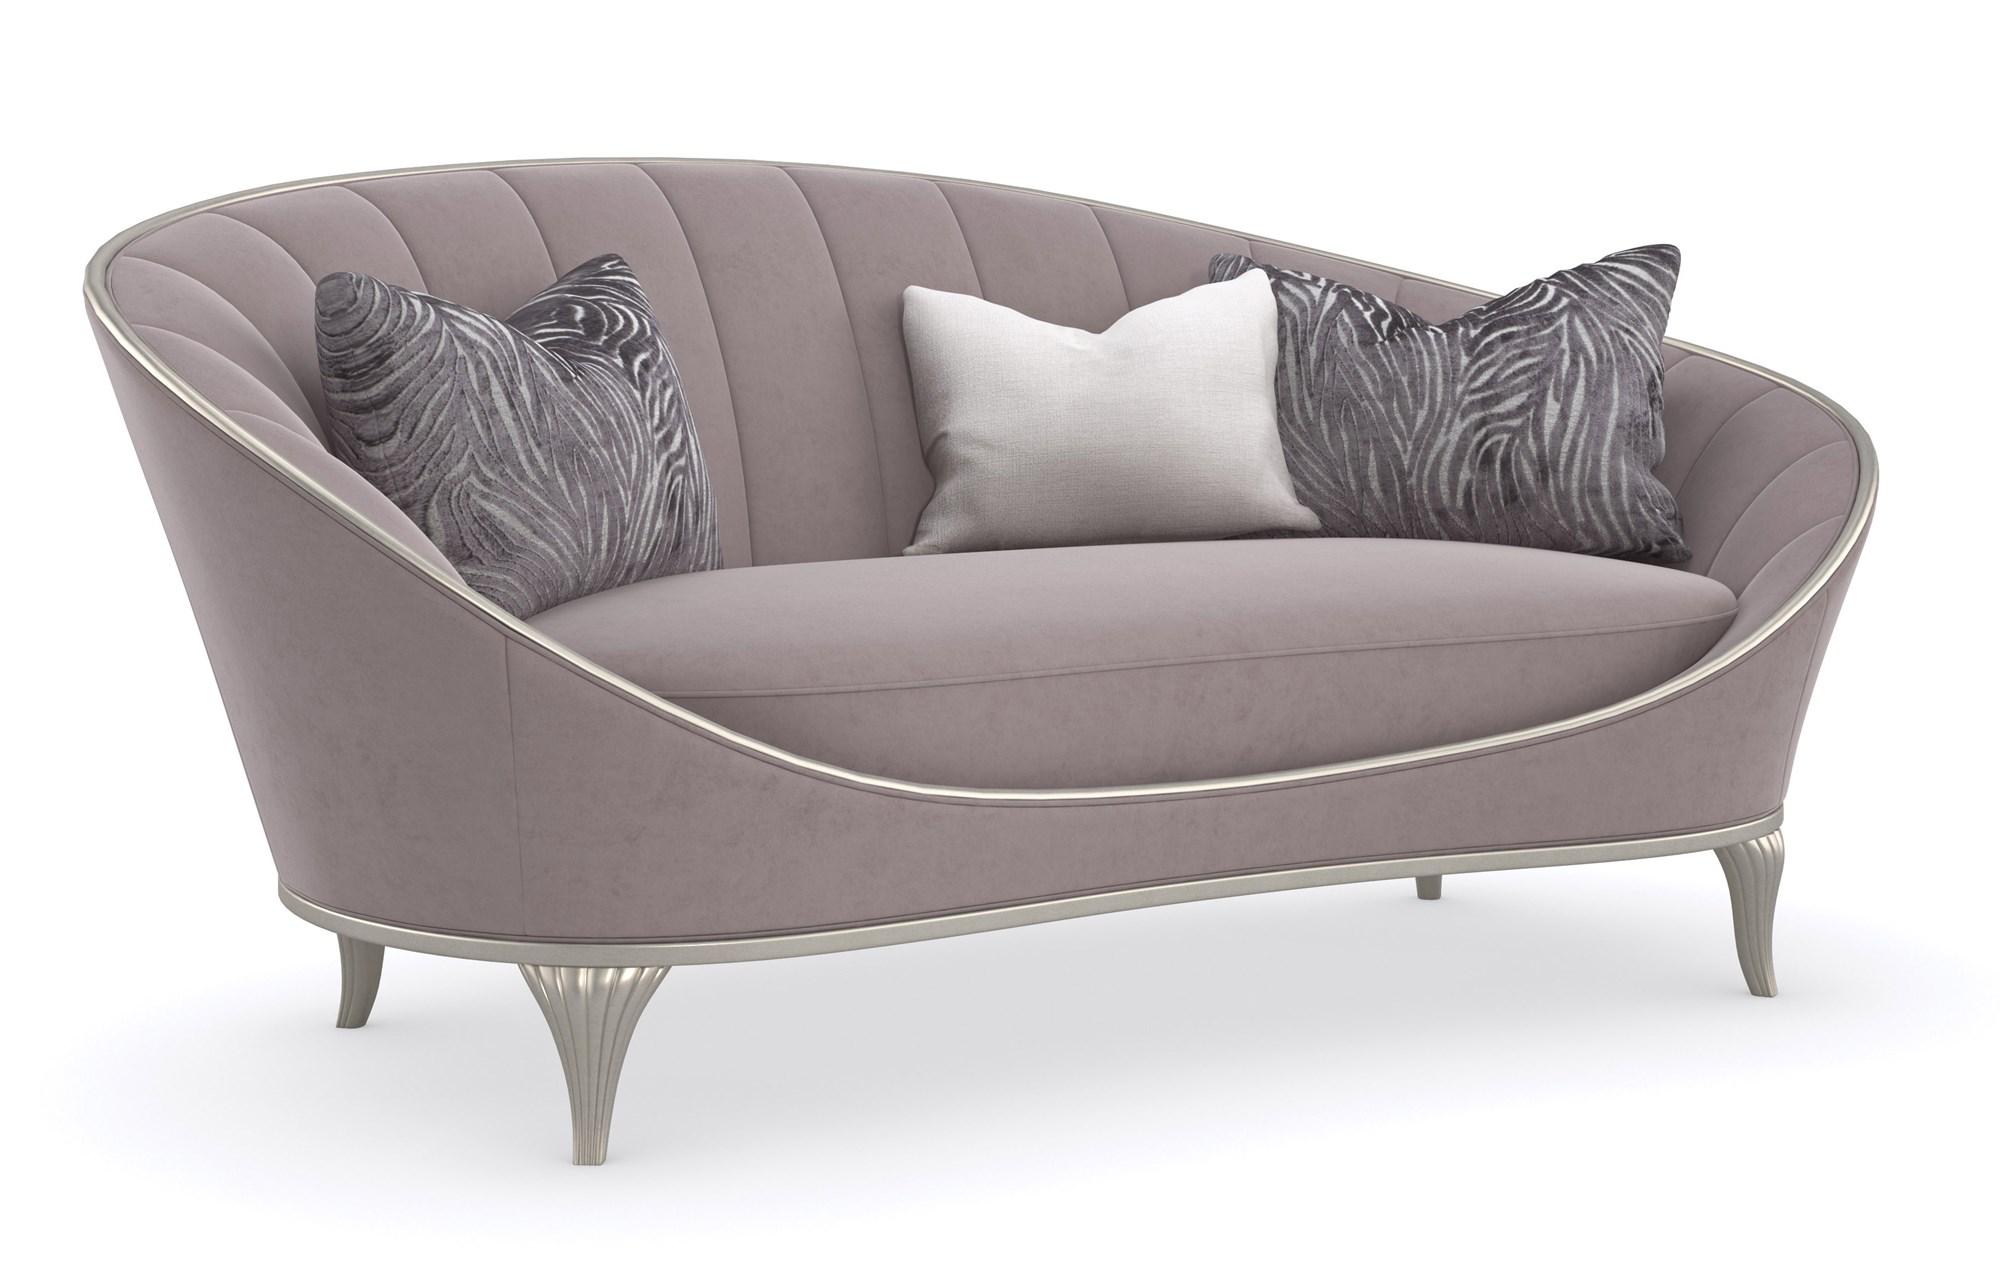 Traditional Loveseat LILLIAN C090-020-071-A in Silver, Lavender Fabric